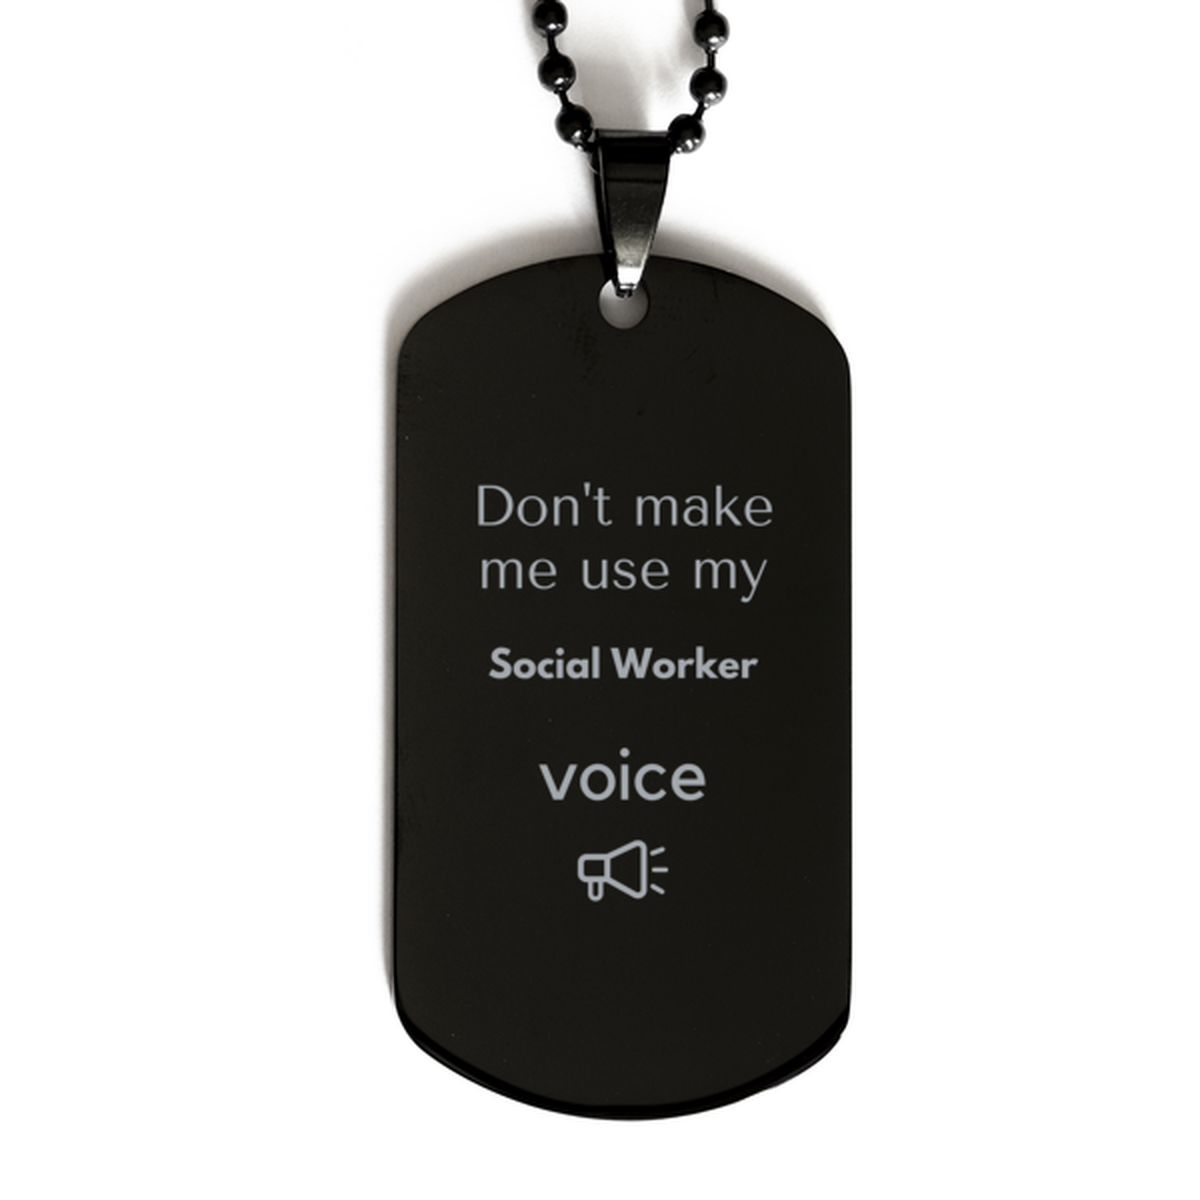 Don't make me use my Social Worker voice, Sarcasm Social Worker Gifts, Christmas Social Worker Black Dog Tag Birthday Unique Gifts For Social Worker Coworkers, Men, Women, Colleague, Friends